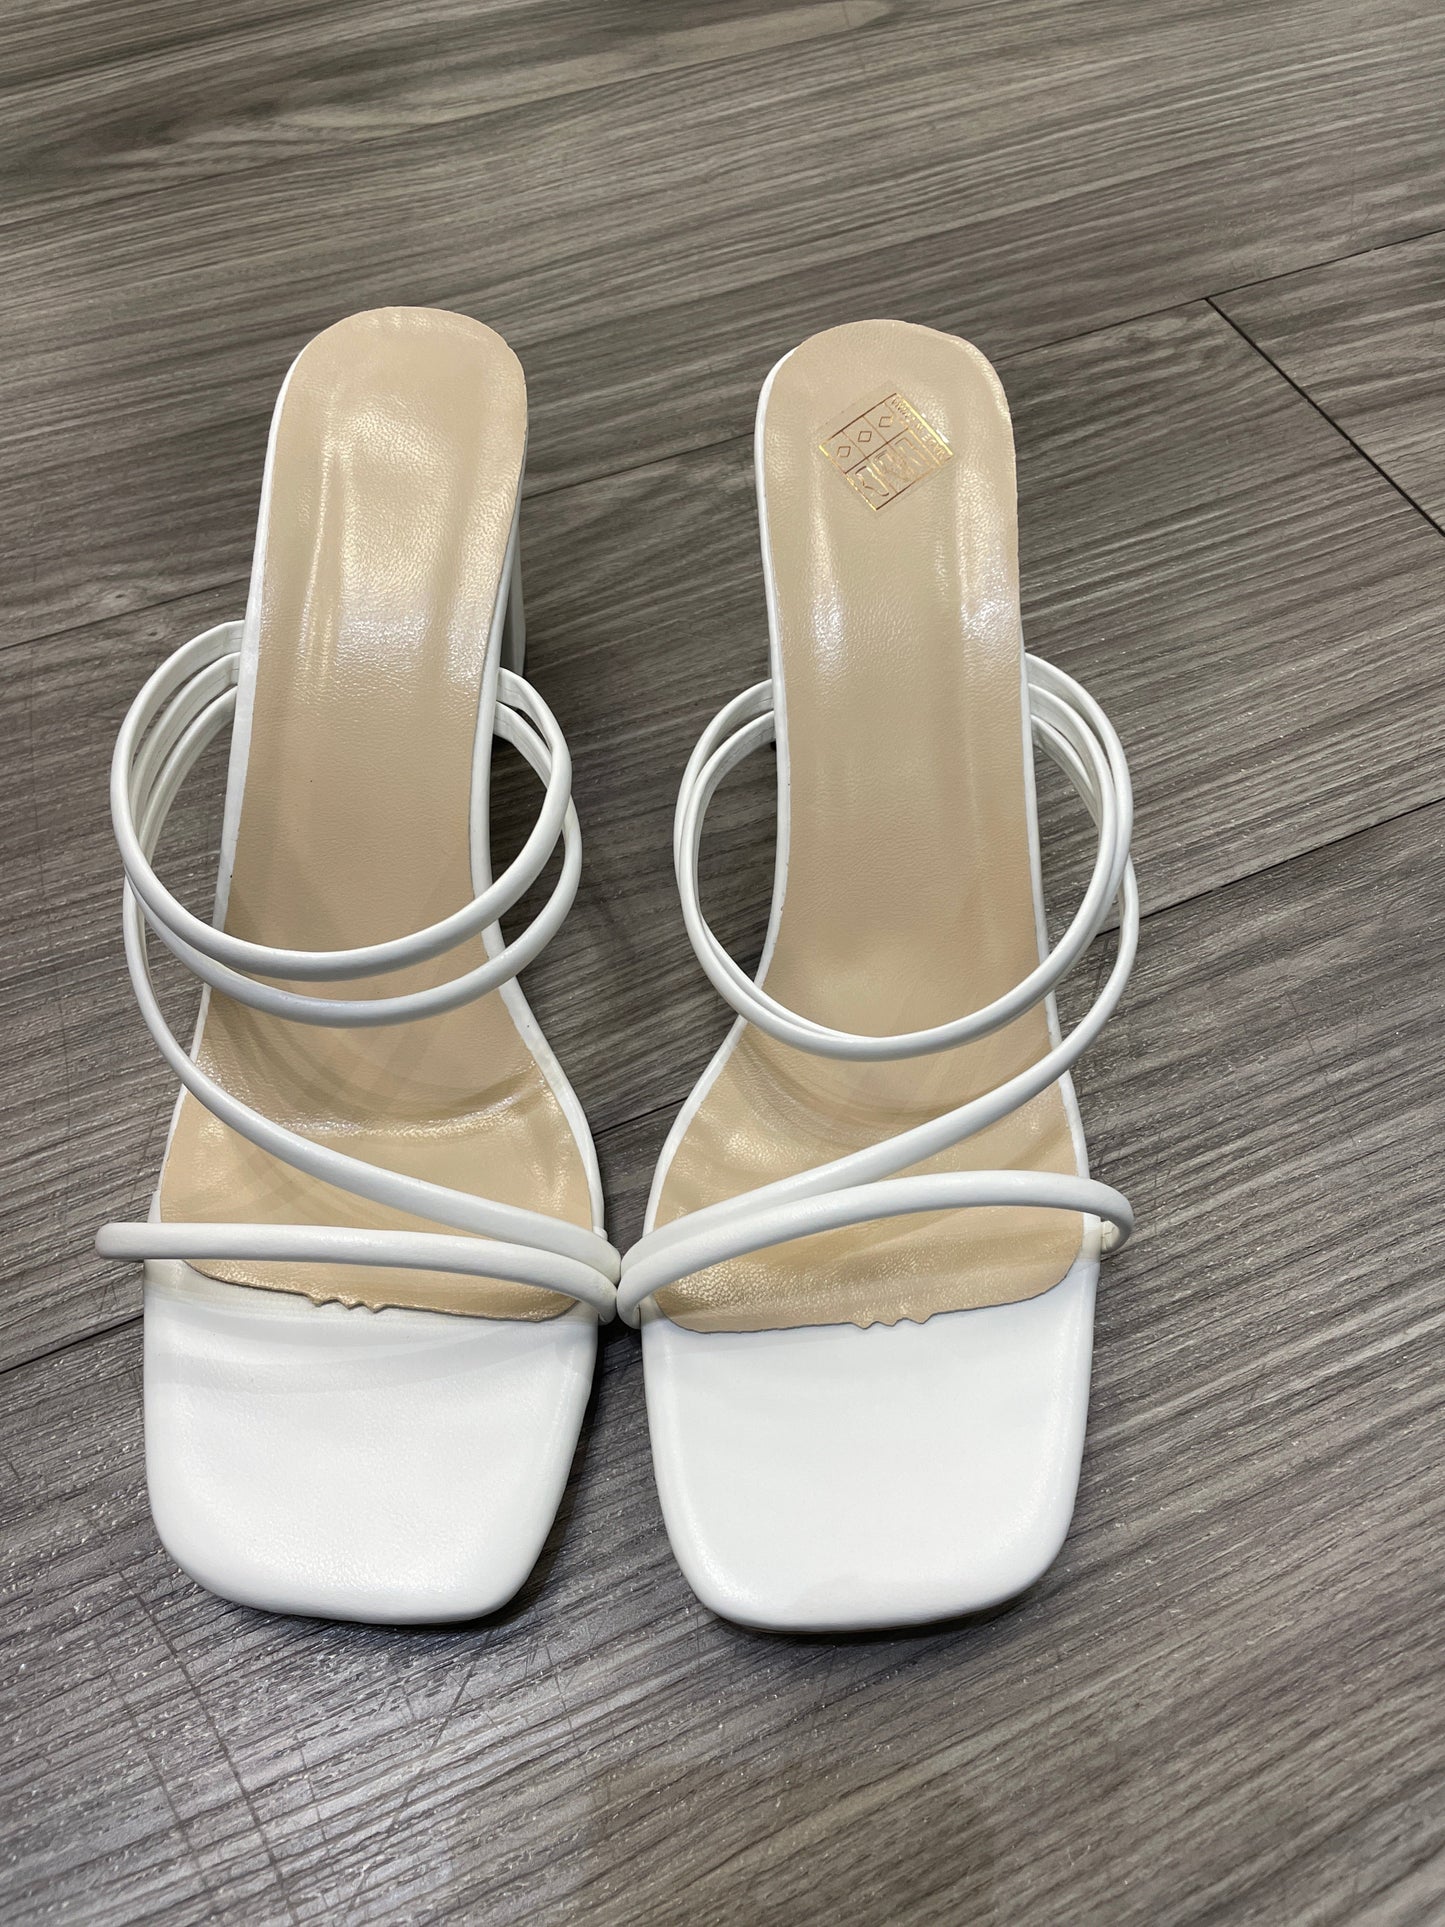 White Shoes Heels Block Clothes Mentor, Size 9